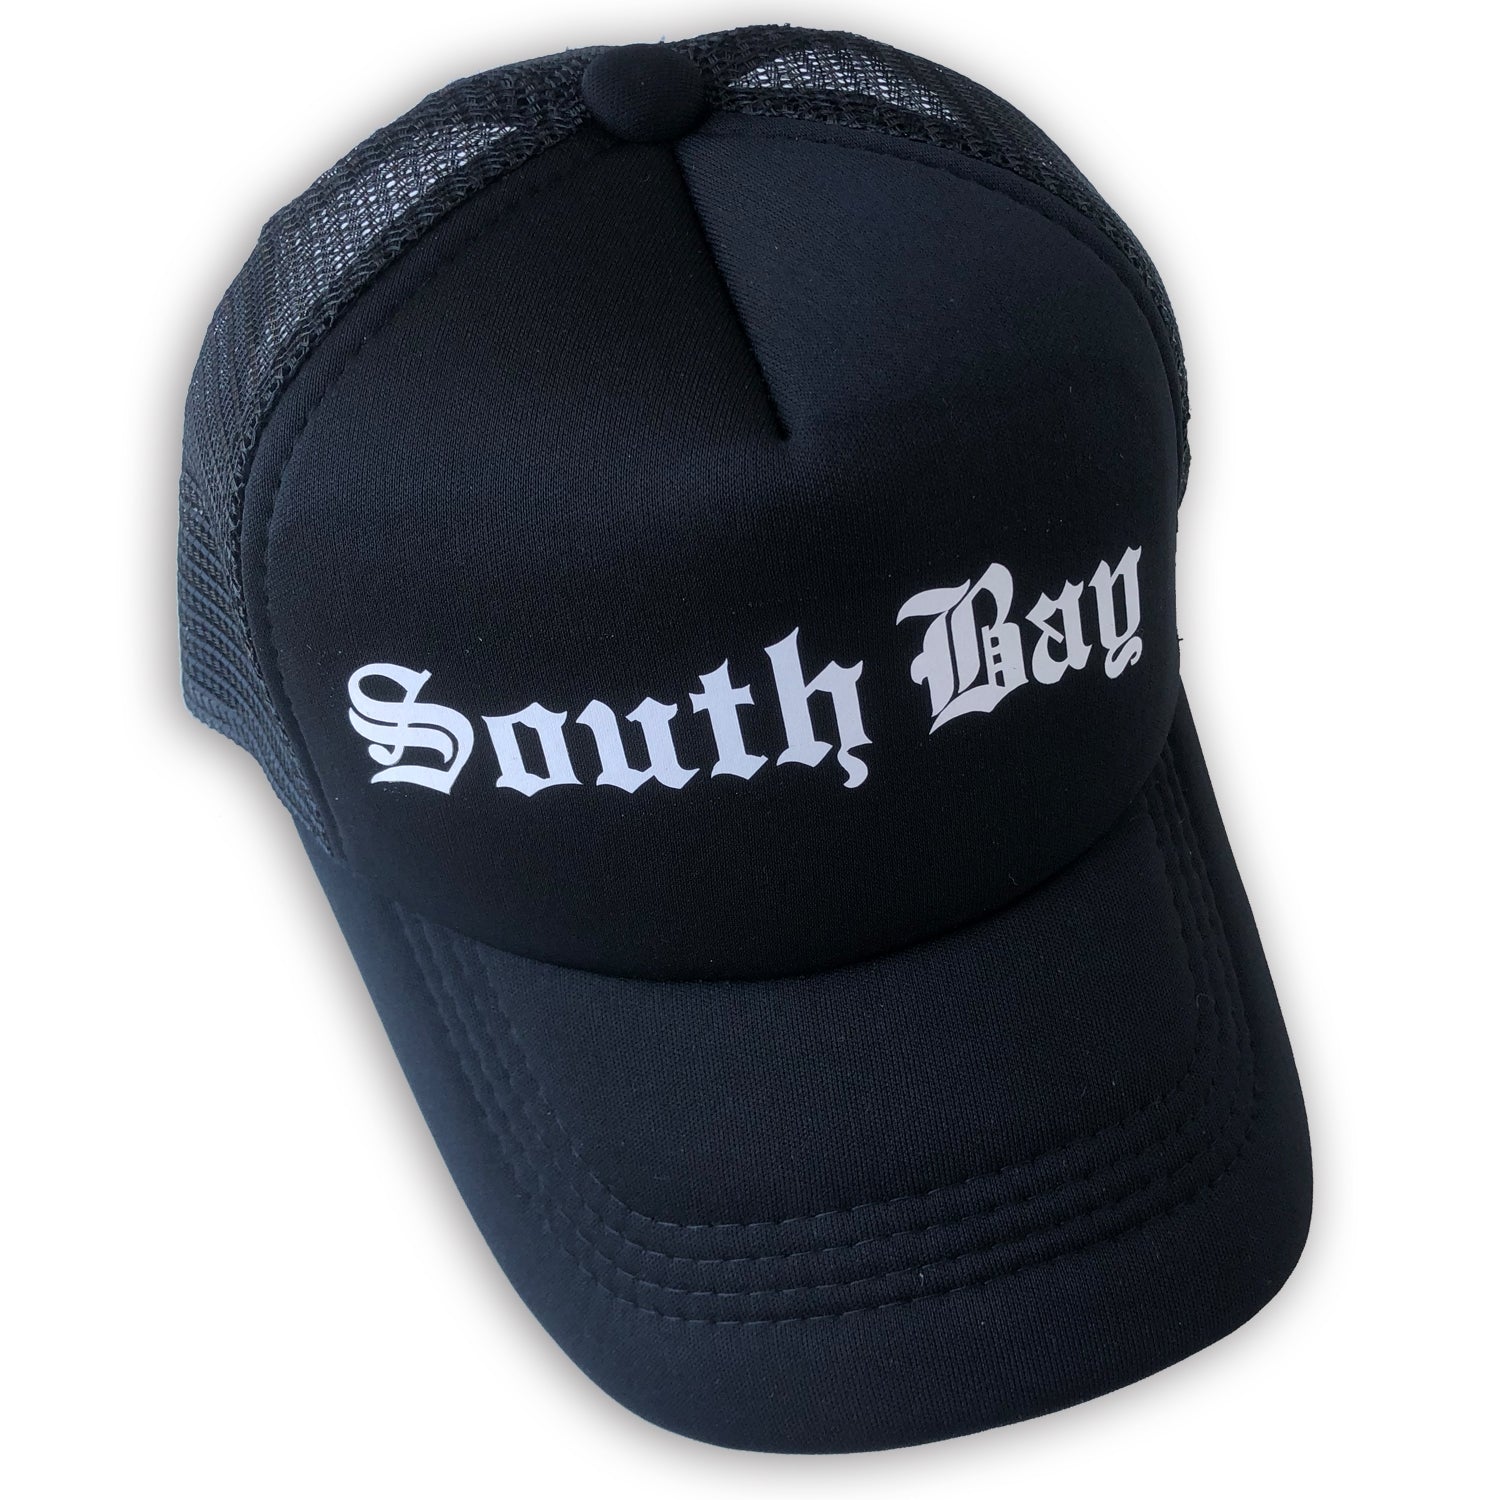 Sol Baby South Bay Old English Trucker Hat